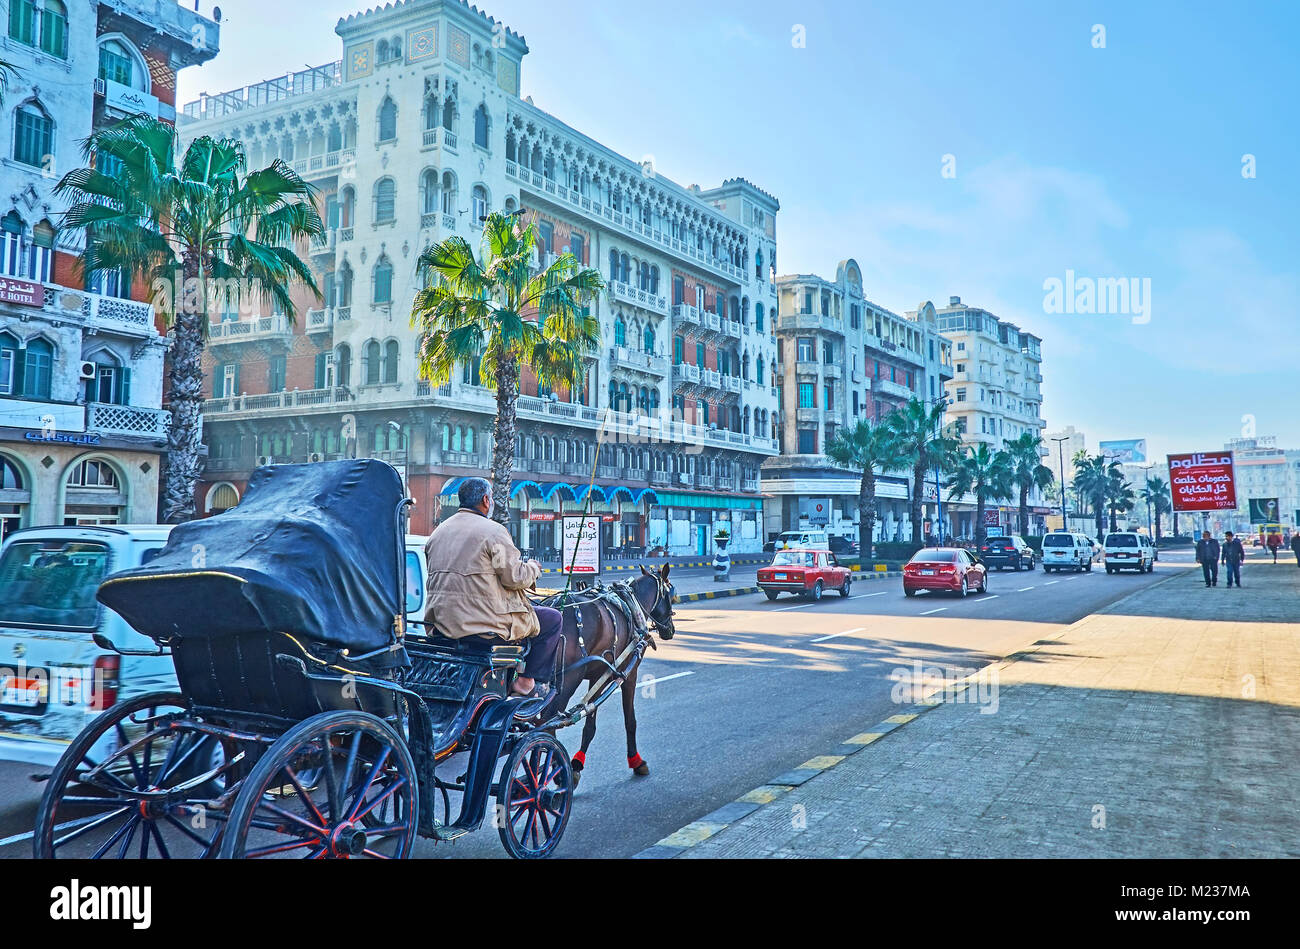 ALEXANDRIA, EGYPT - DECEMBER 18, 2017: The horse carriage rides along the Corniche avenue with a view on historic Little Venice mansion on background, Stock Photo